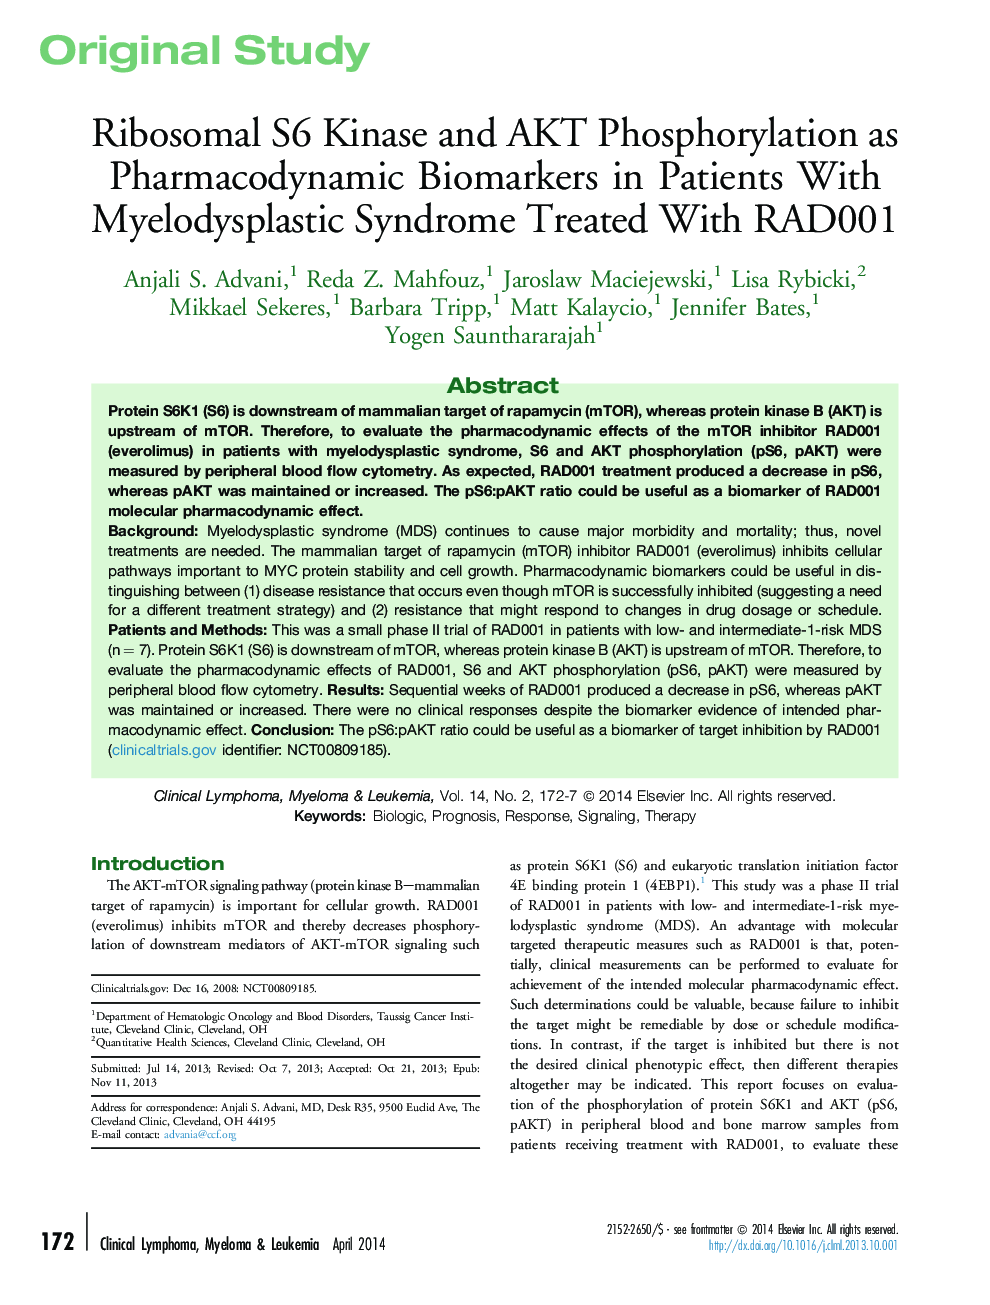 Ribosomal S6 Kinase and AKT Phosphorylation as Pharmacodynamic Biomarkers in Patients With Myelodysplastic Syndrome Treated With RAD001